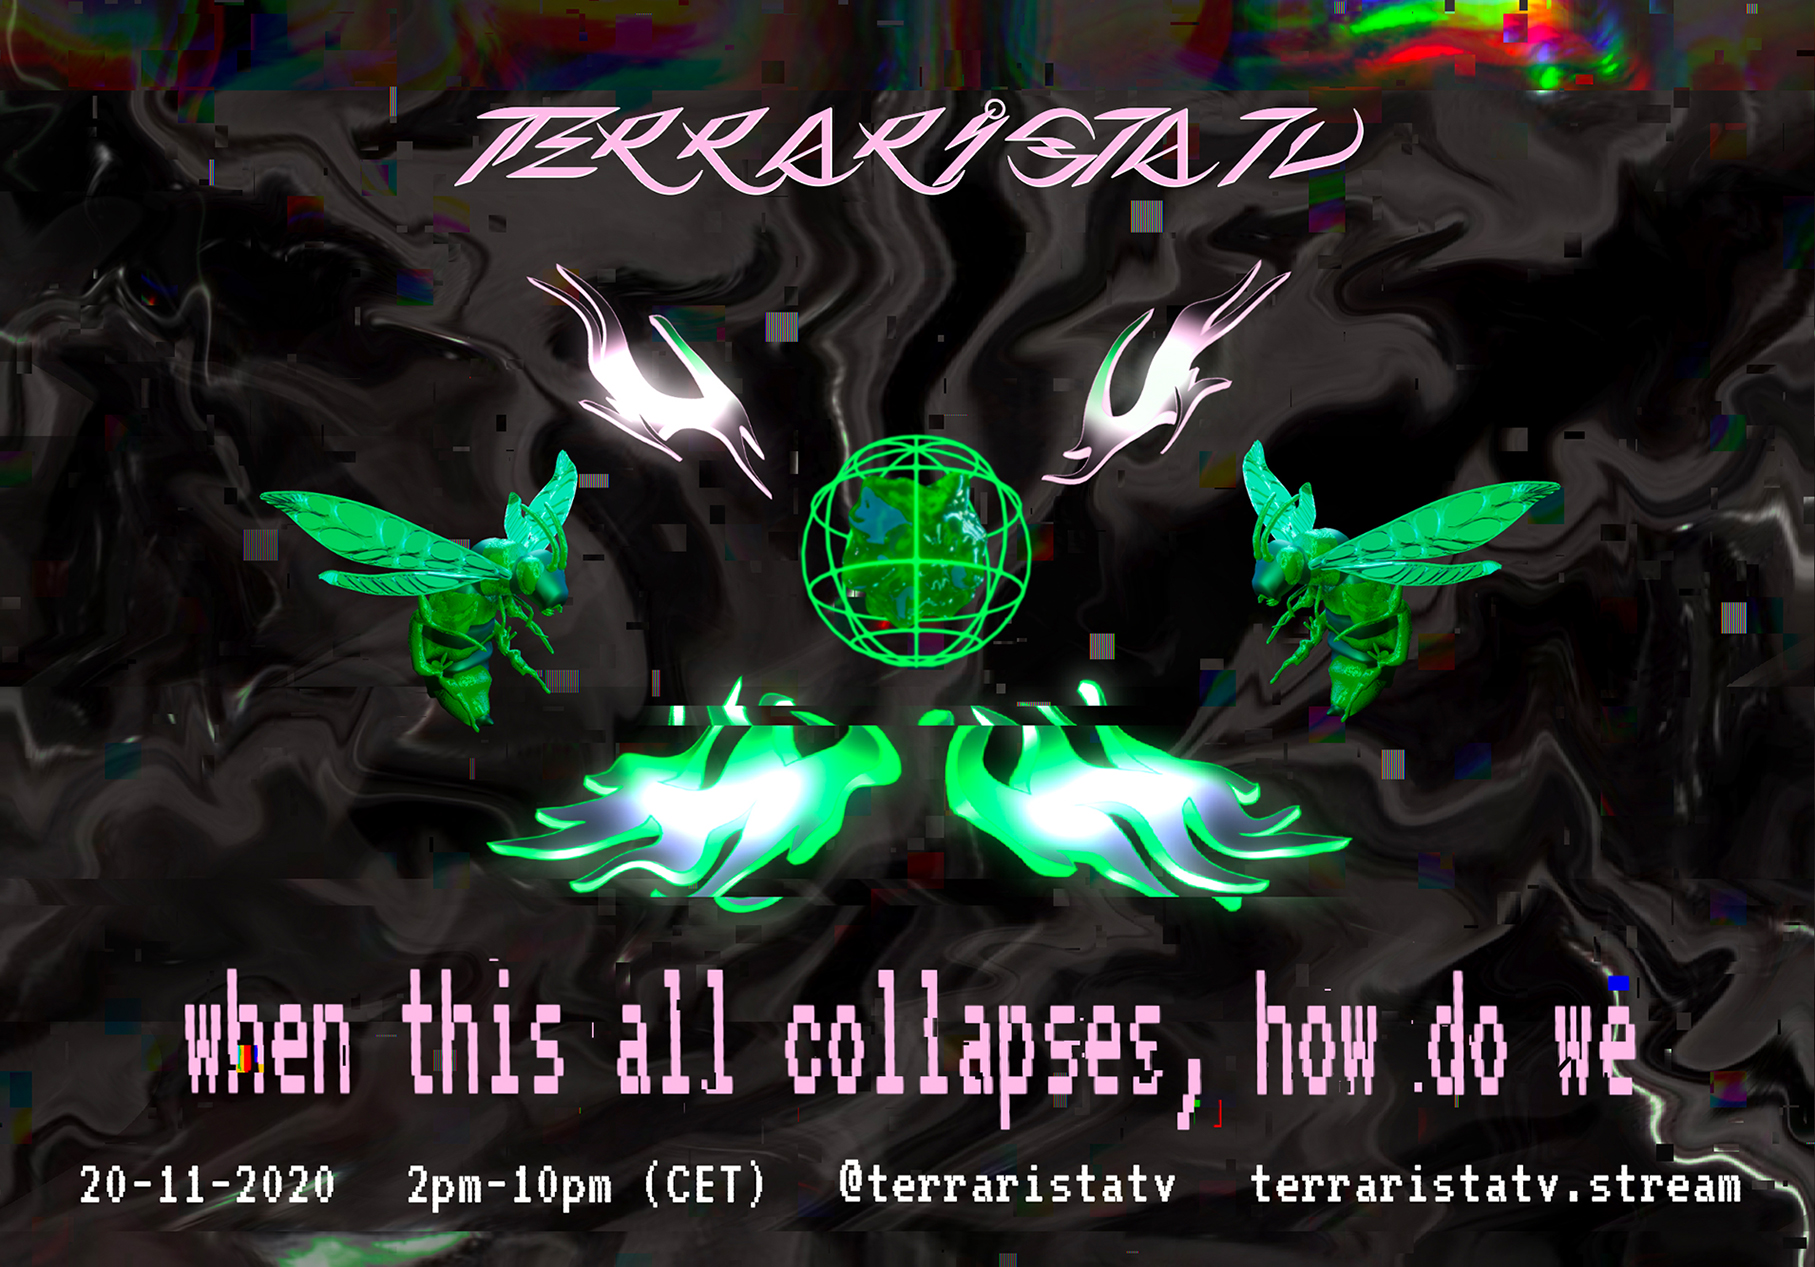 TERRARISTA TV presents: “When this all collapses, how do we”